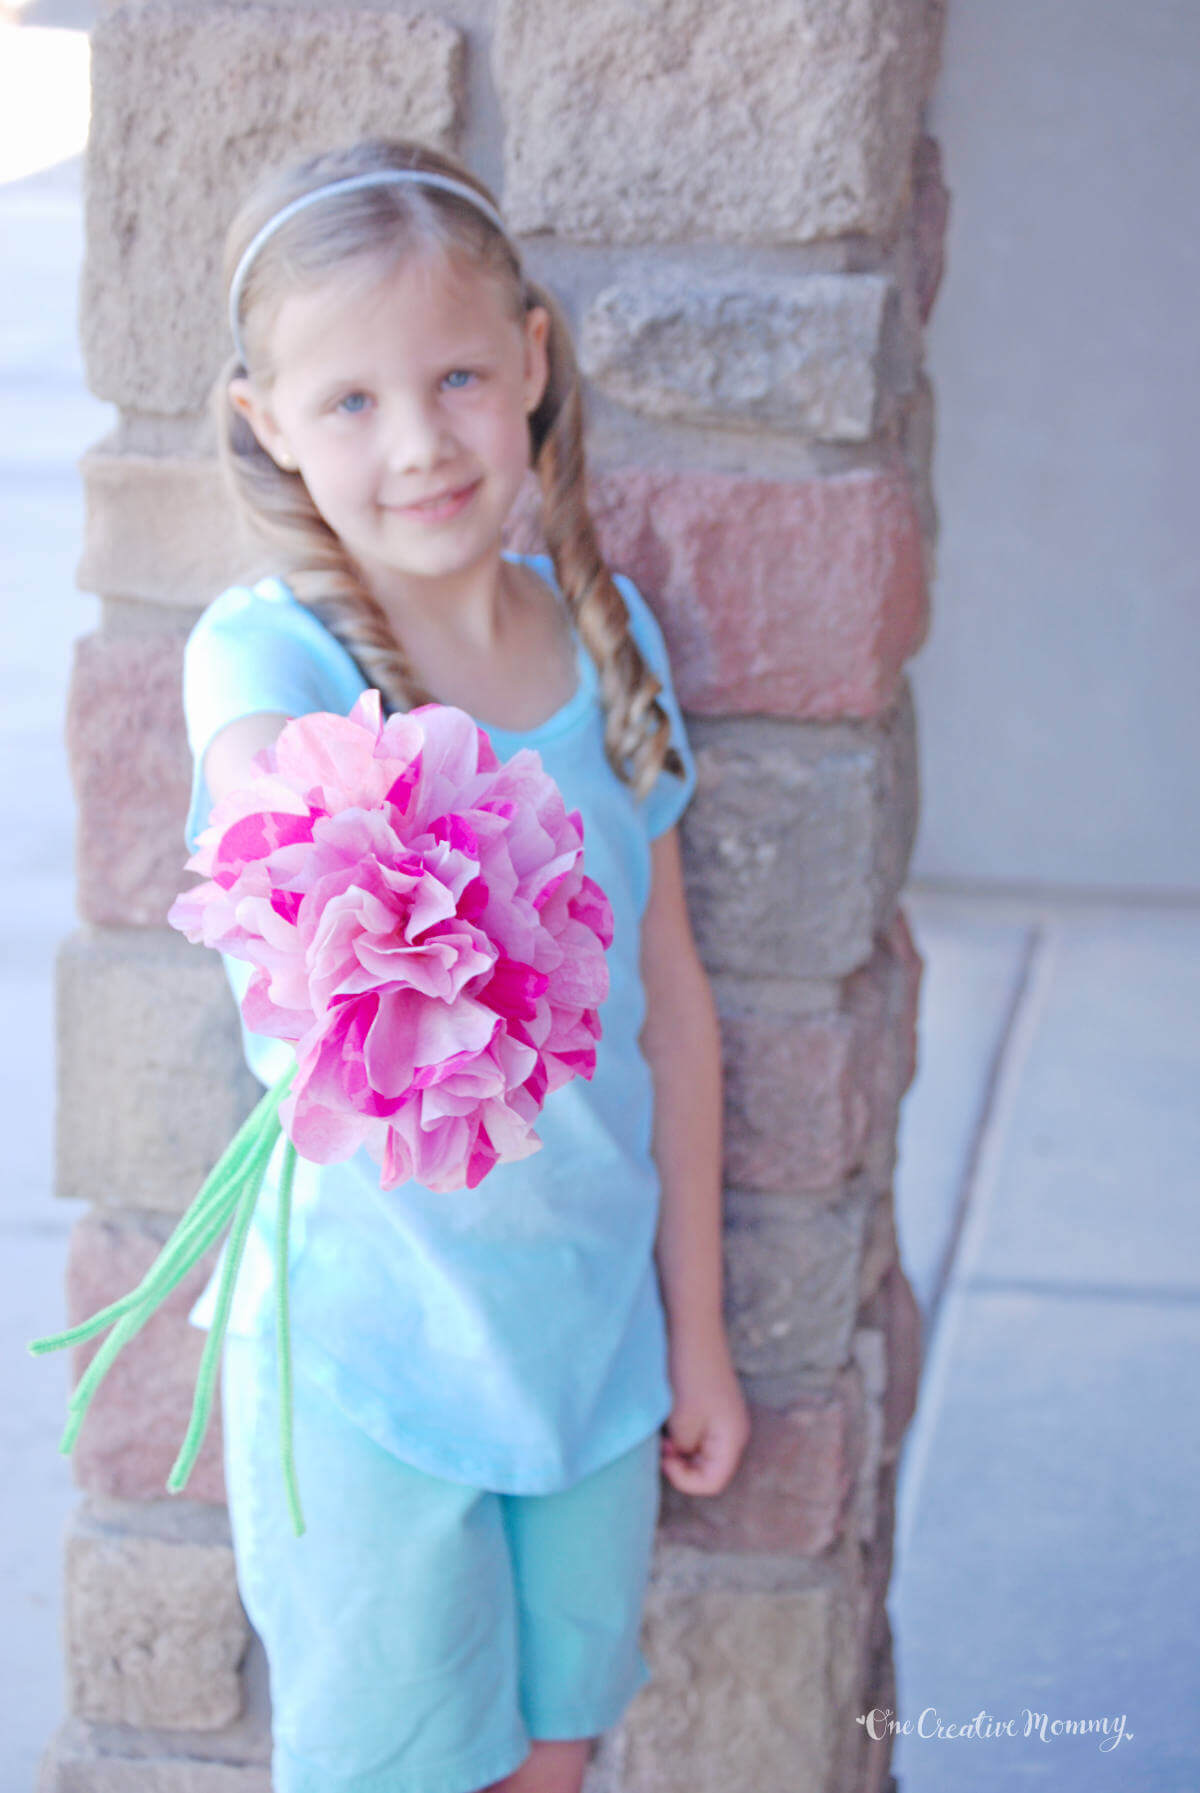 A little girl wearing light blue shorts and t-shirt stands in front of a brick pillar. She is smiling and holding a bouquet of pink coffee filter flowers with green chenille stems out toward the camera.